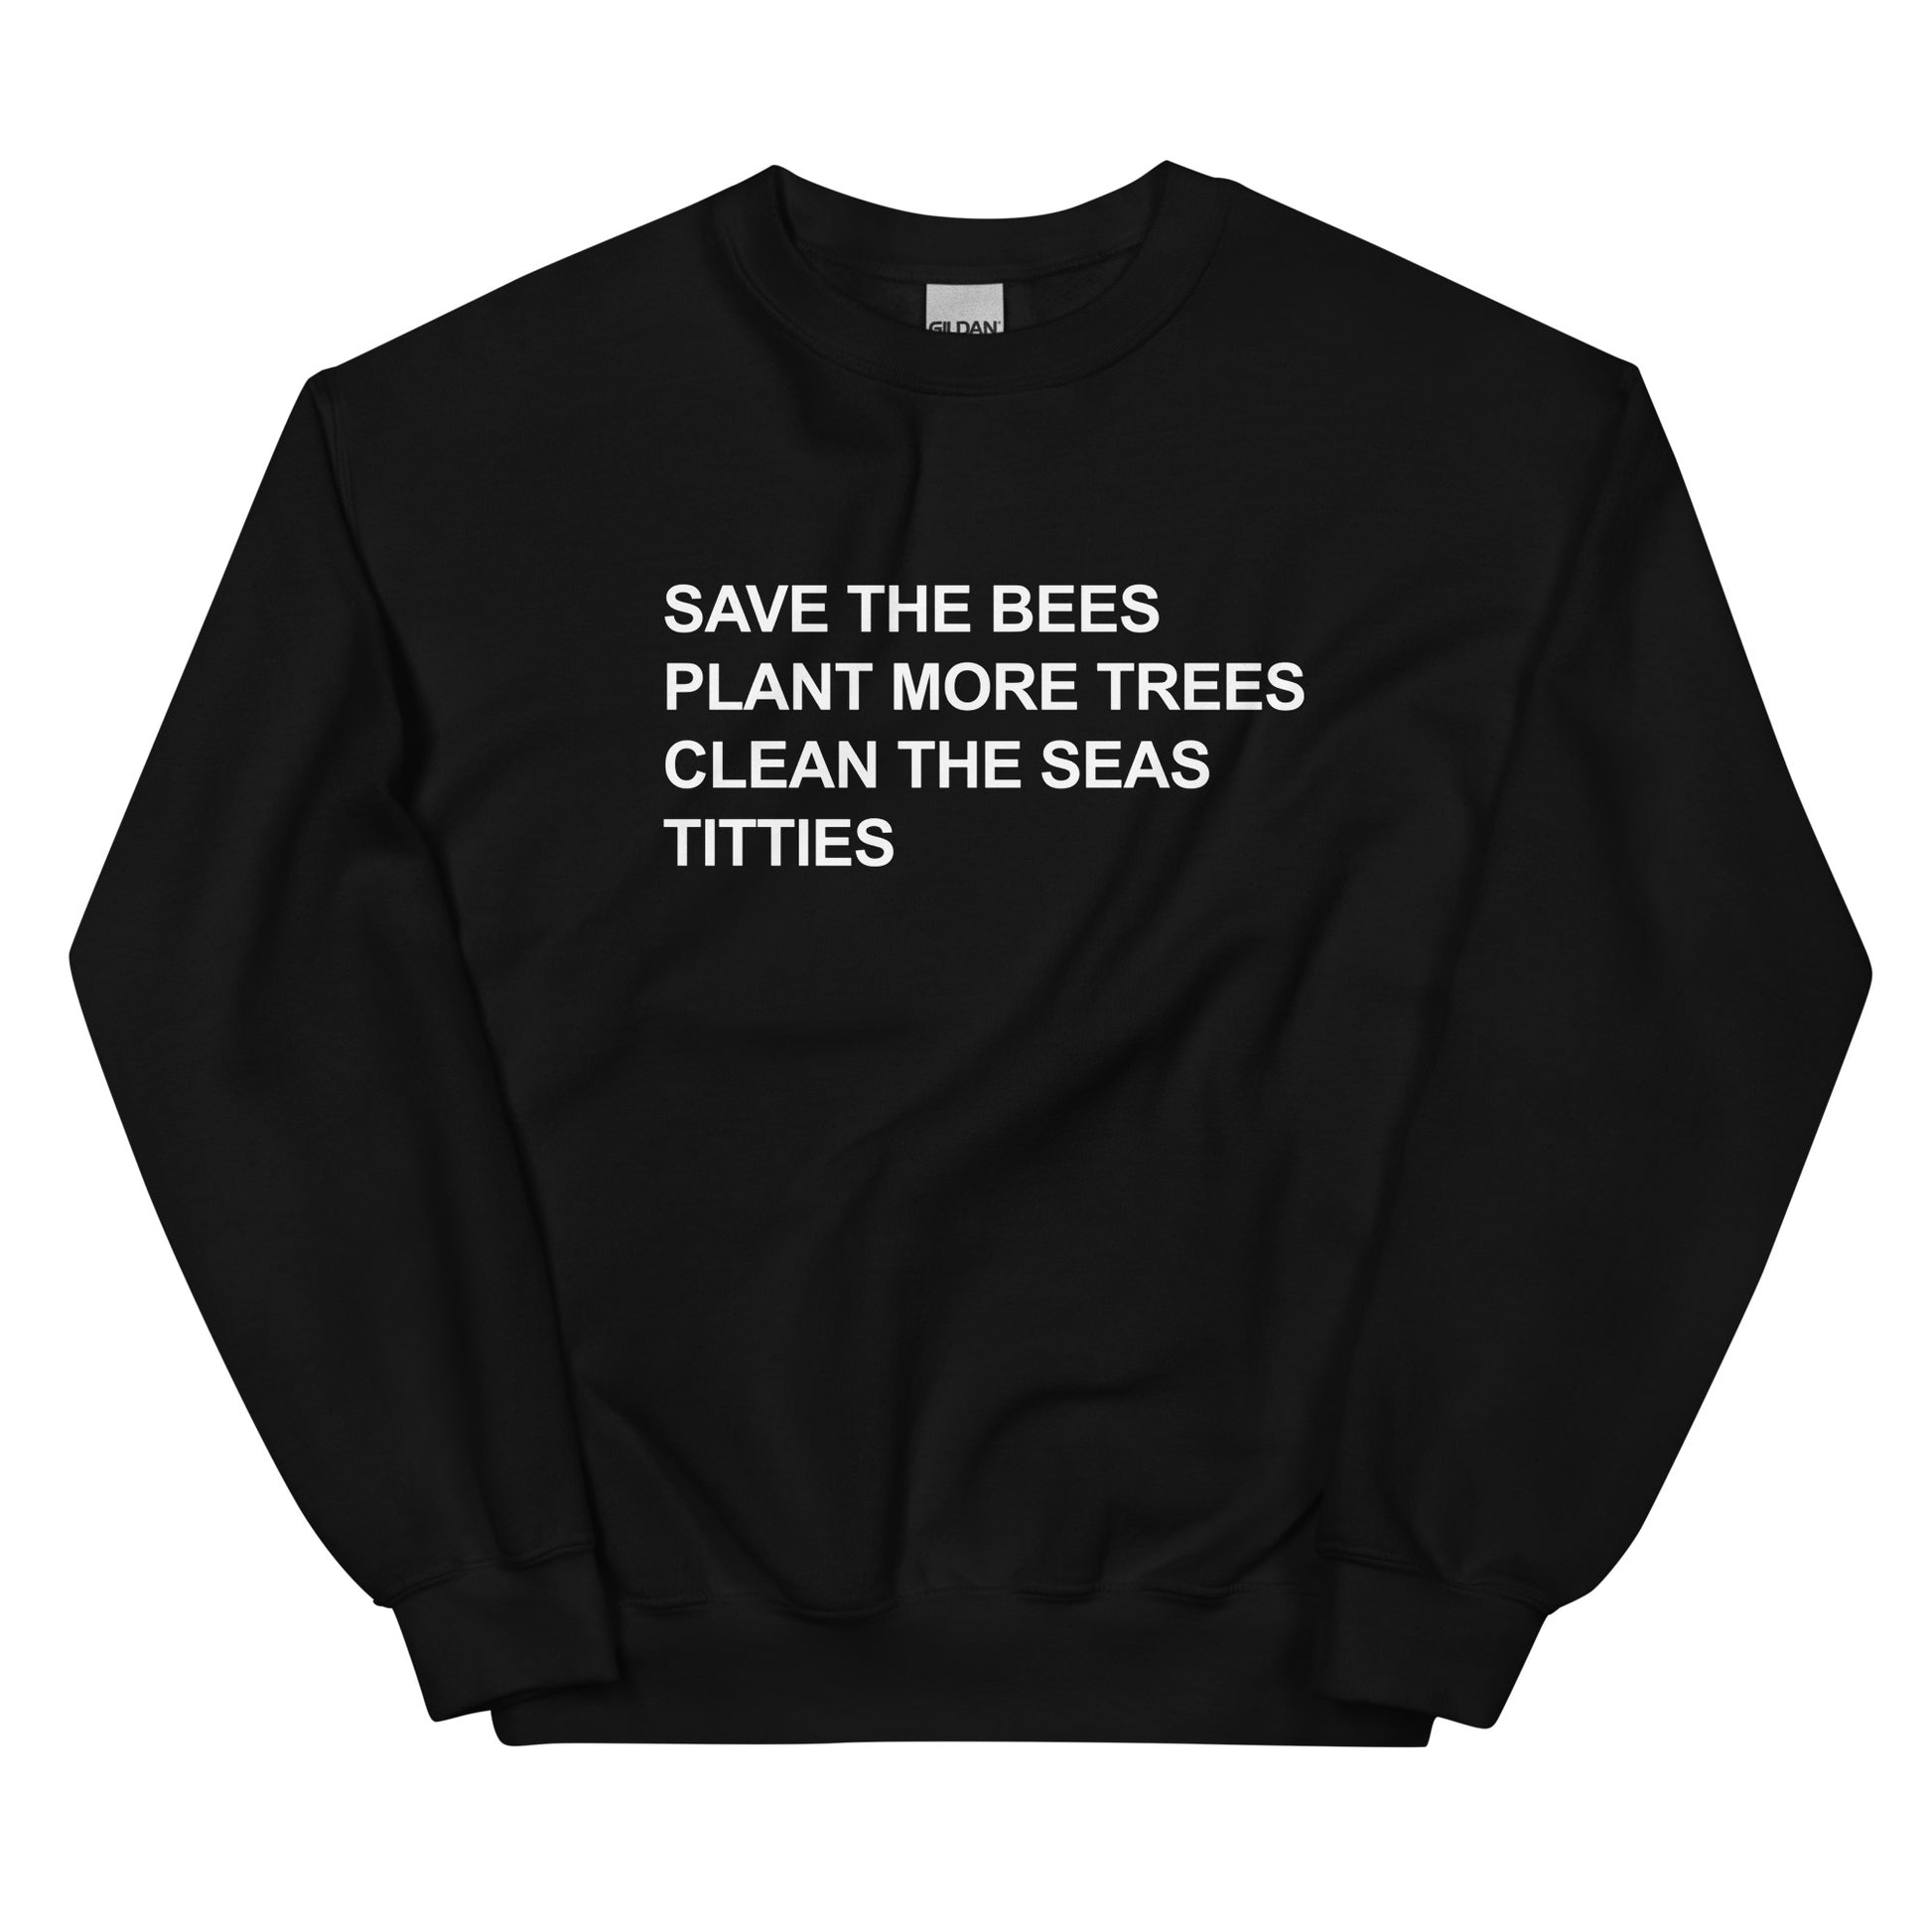 Save the bees plant more trees clean the seas titties Sweatshirt